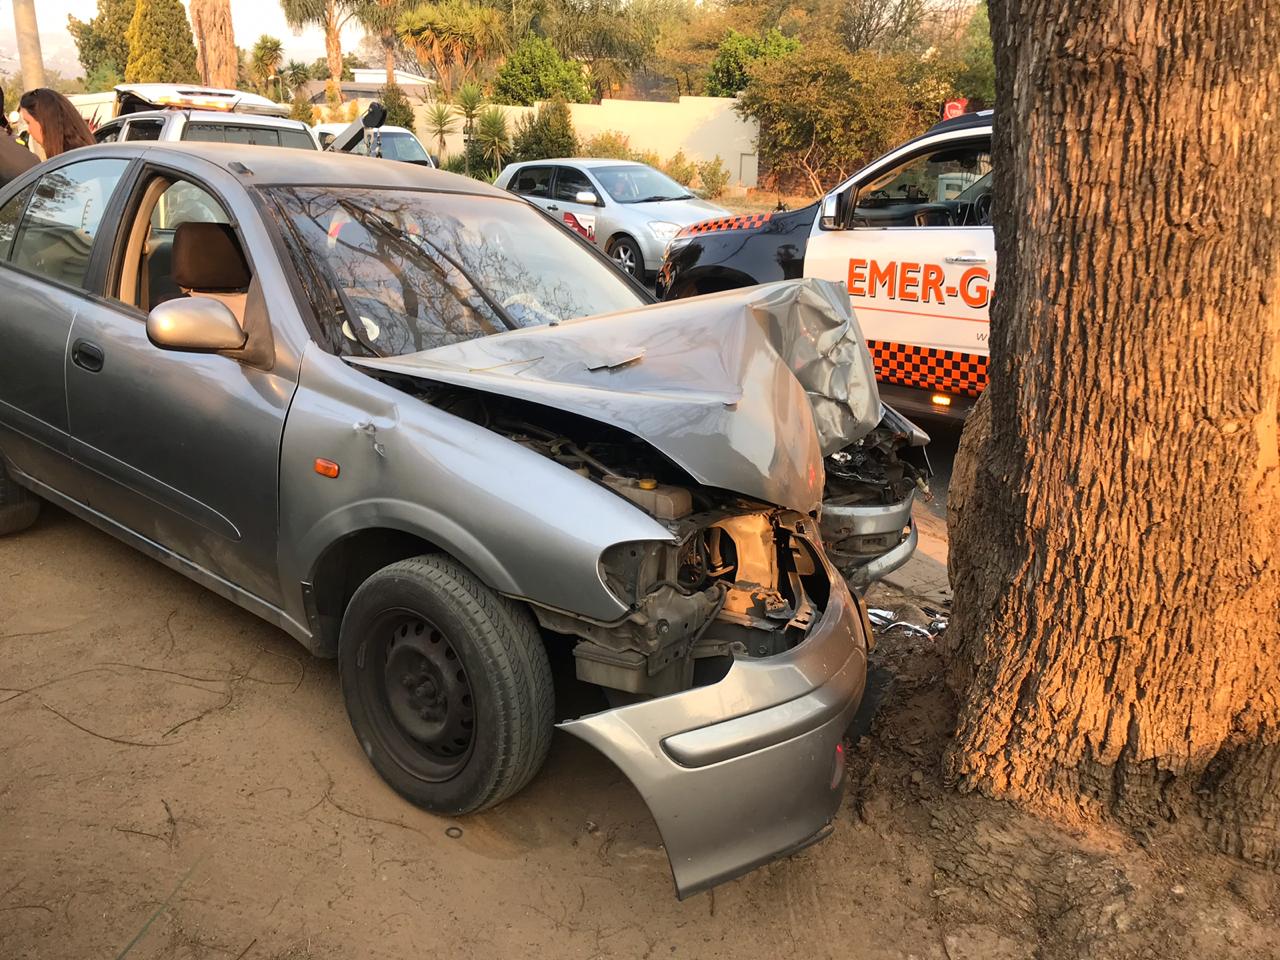 Two injured in collision in Olivedale